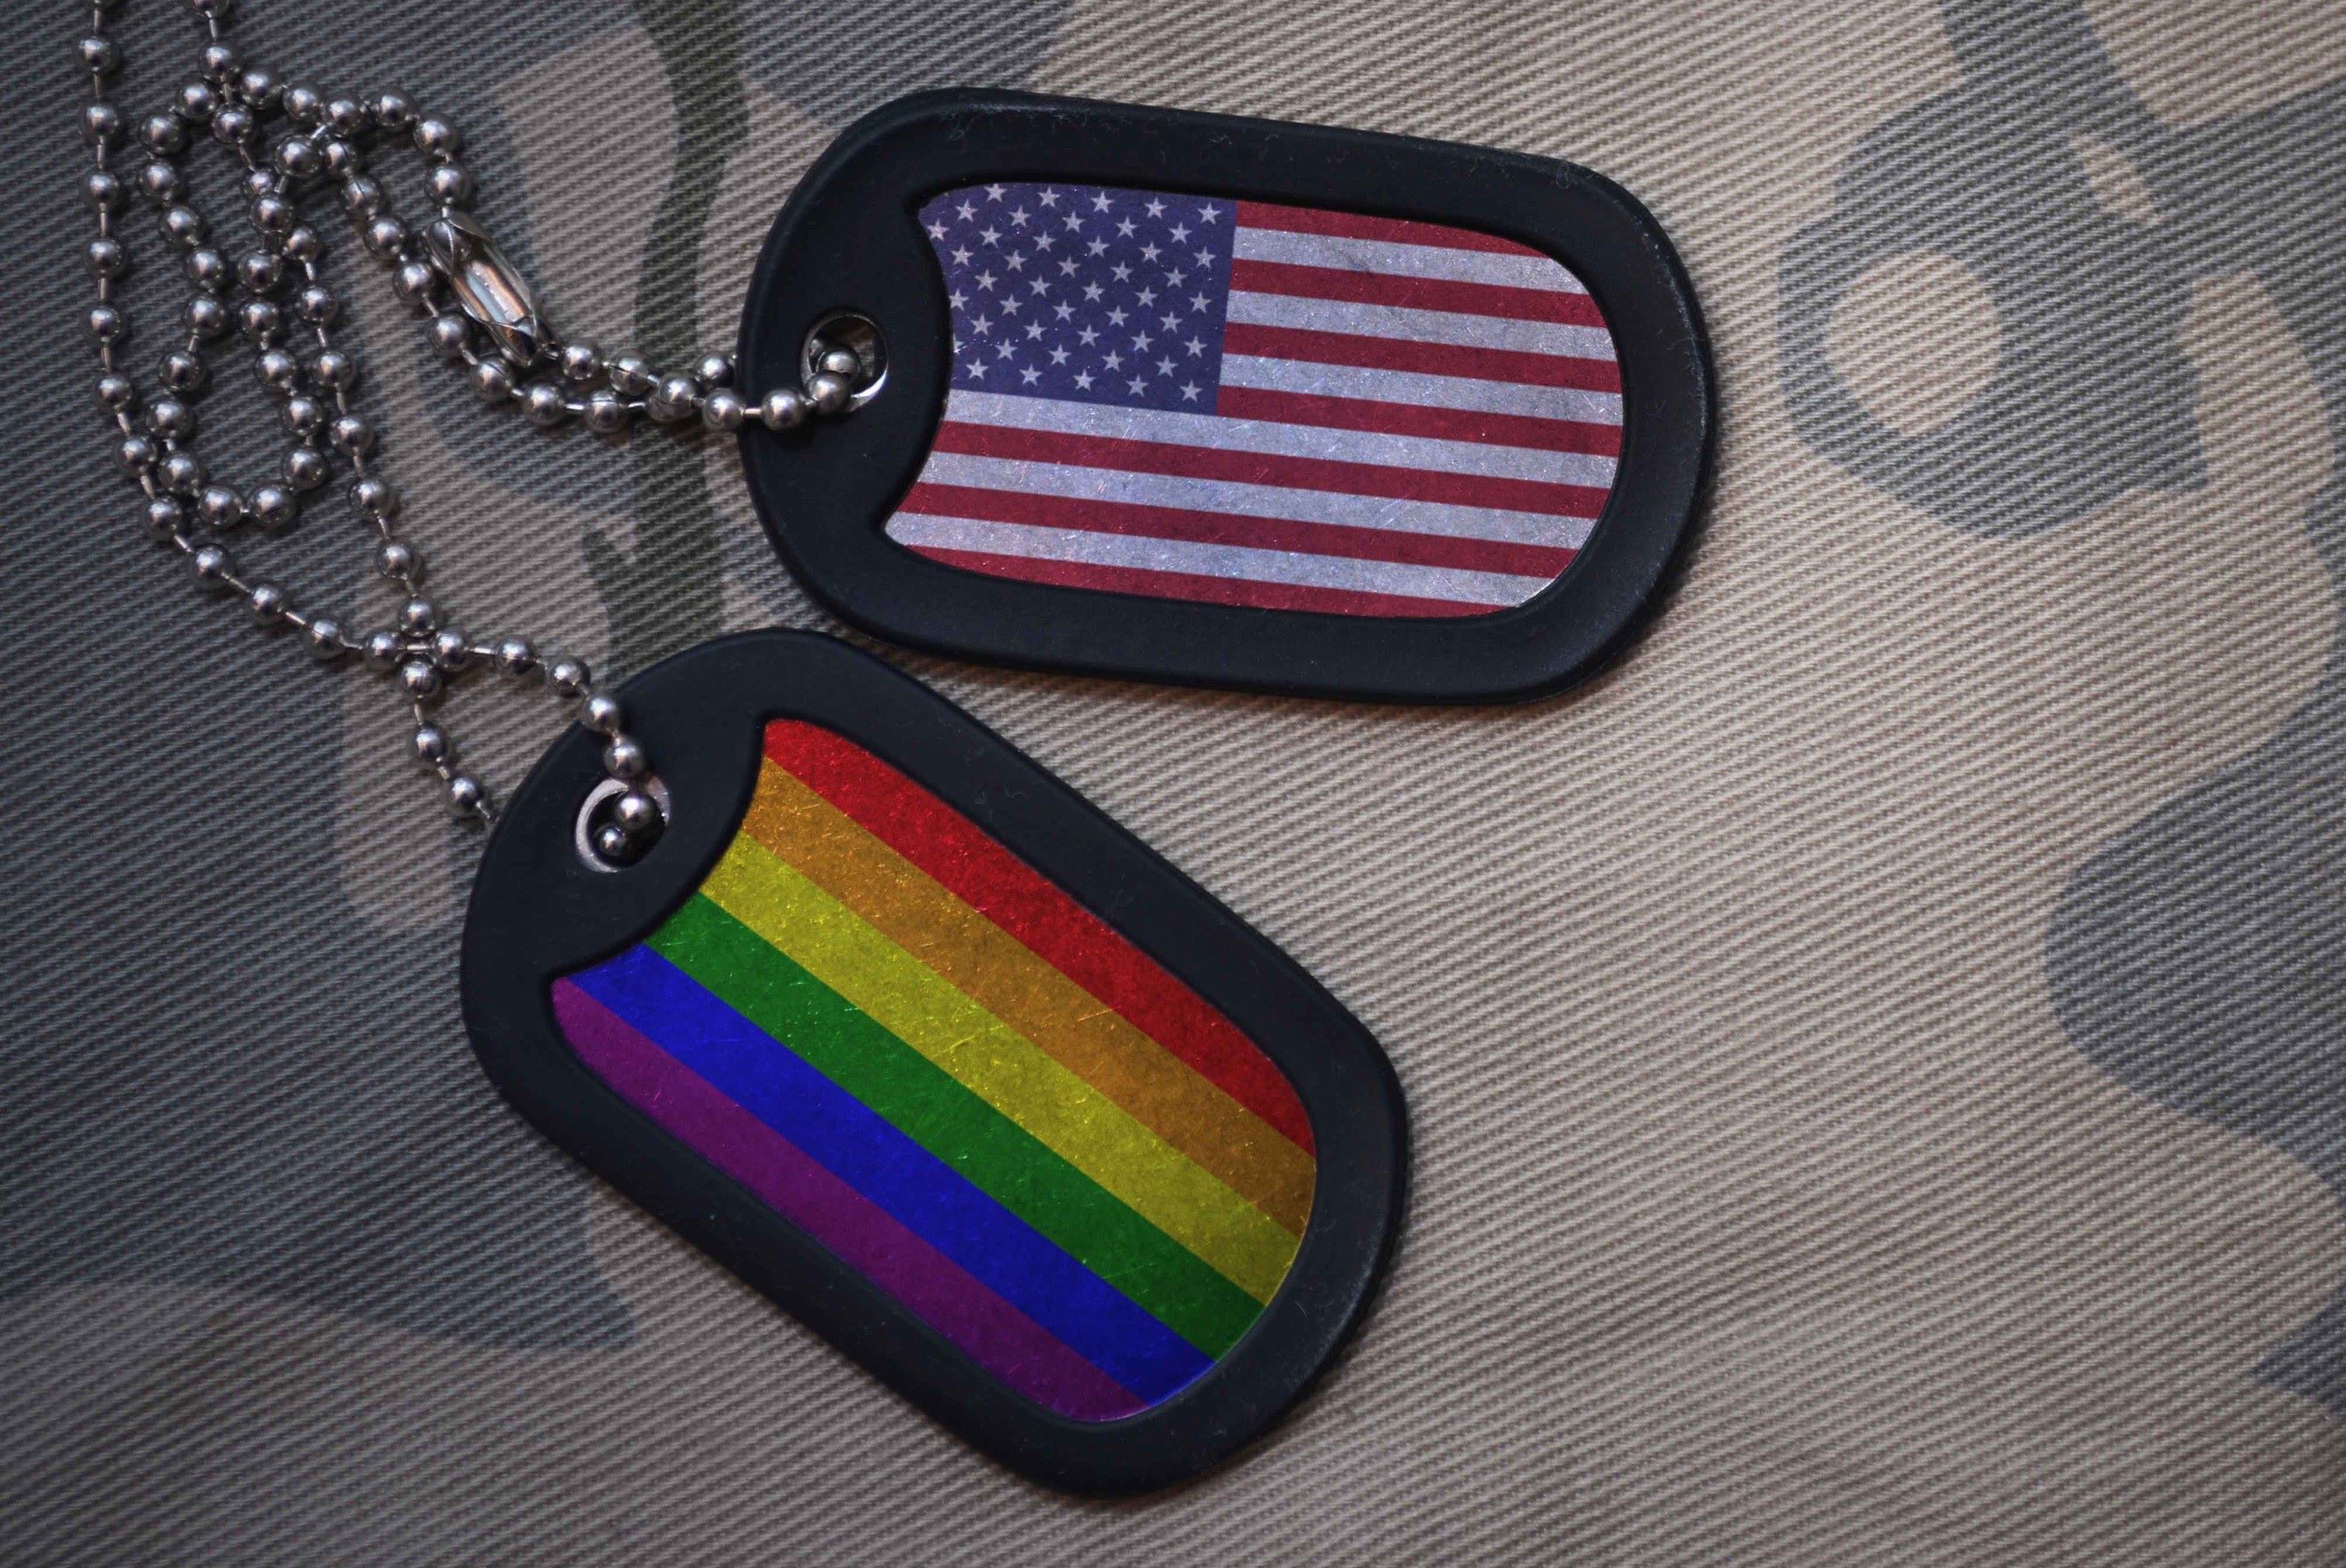 29,000 LGBTQ troops denied Honorable Discharges